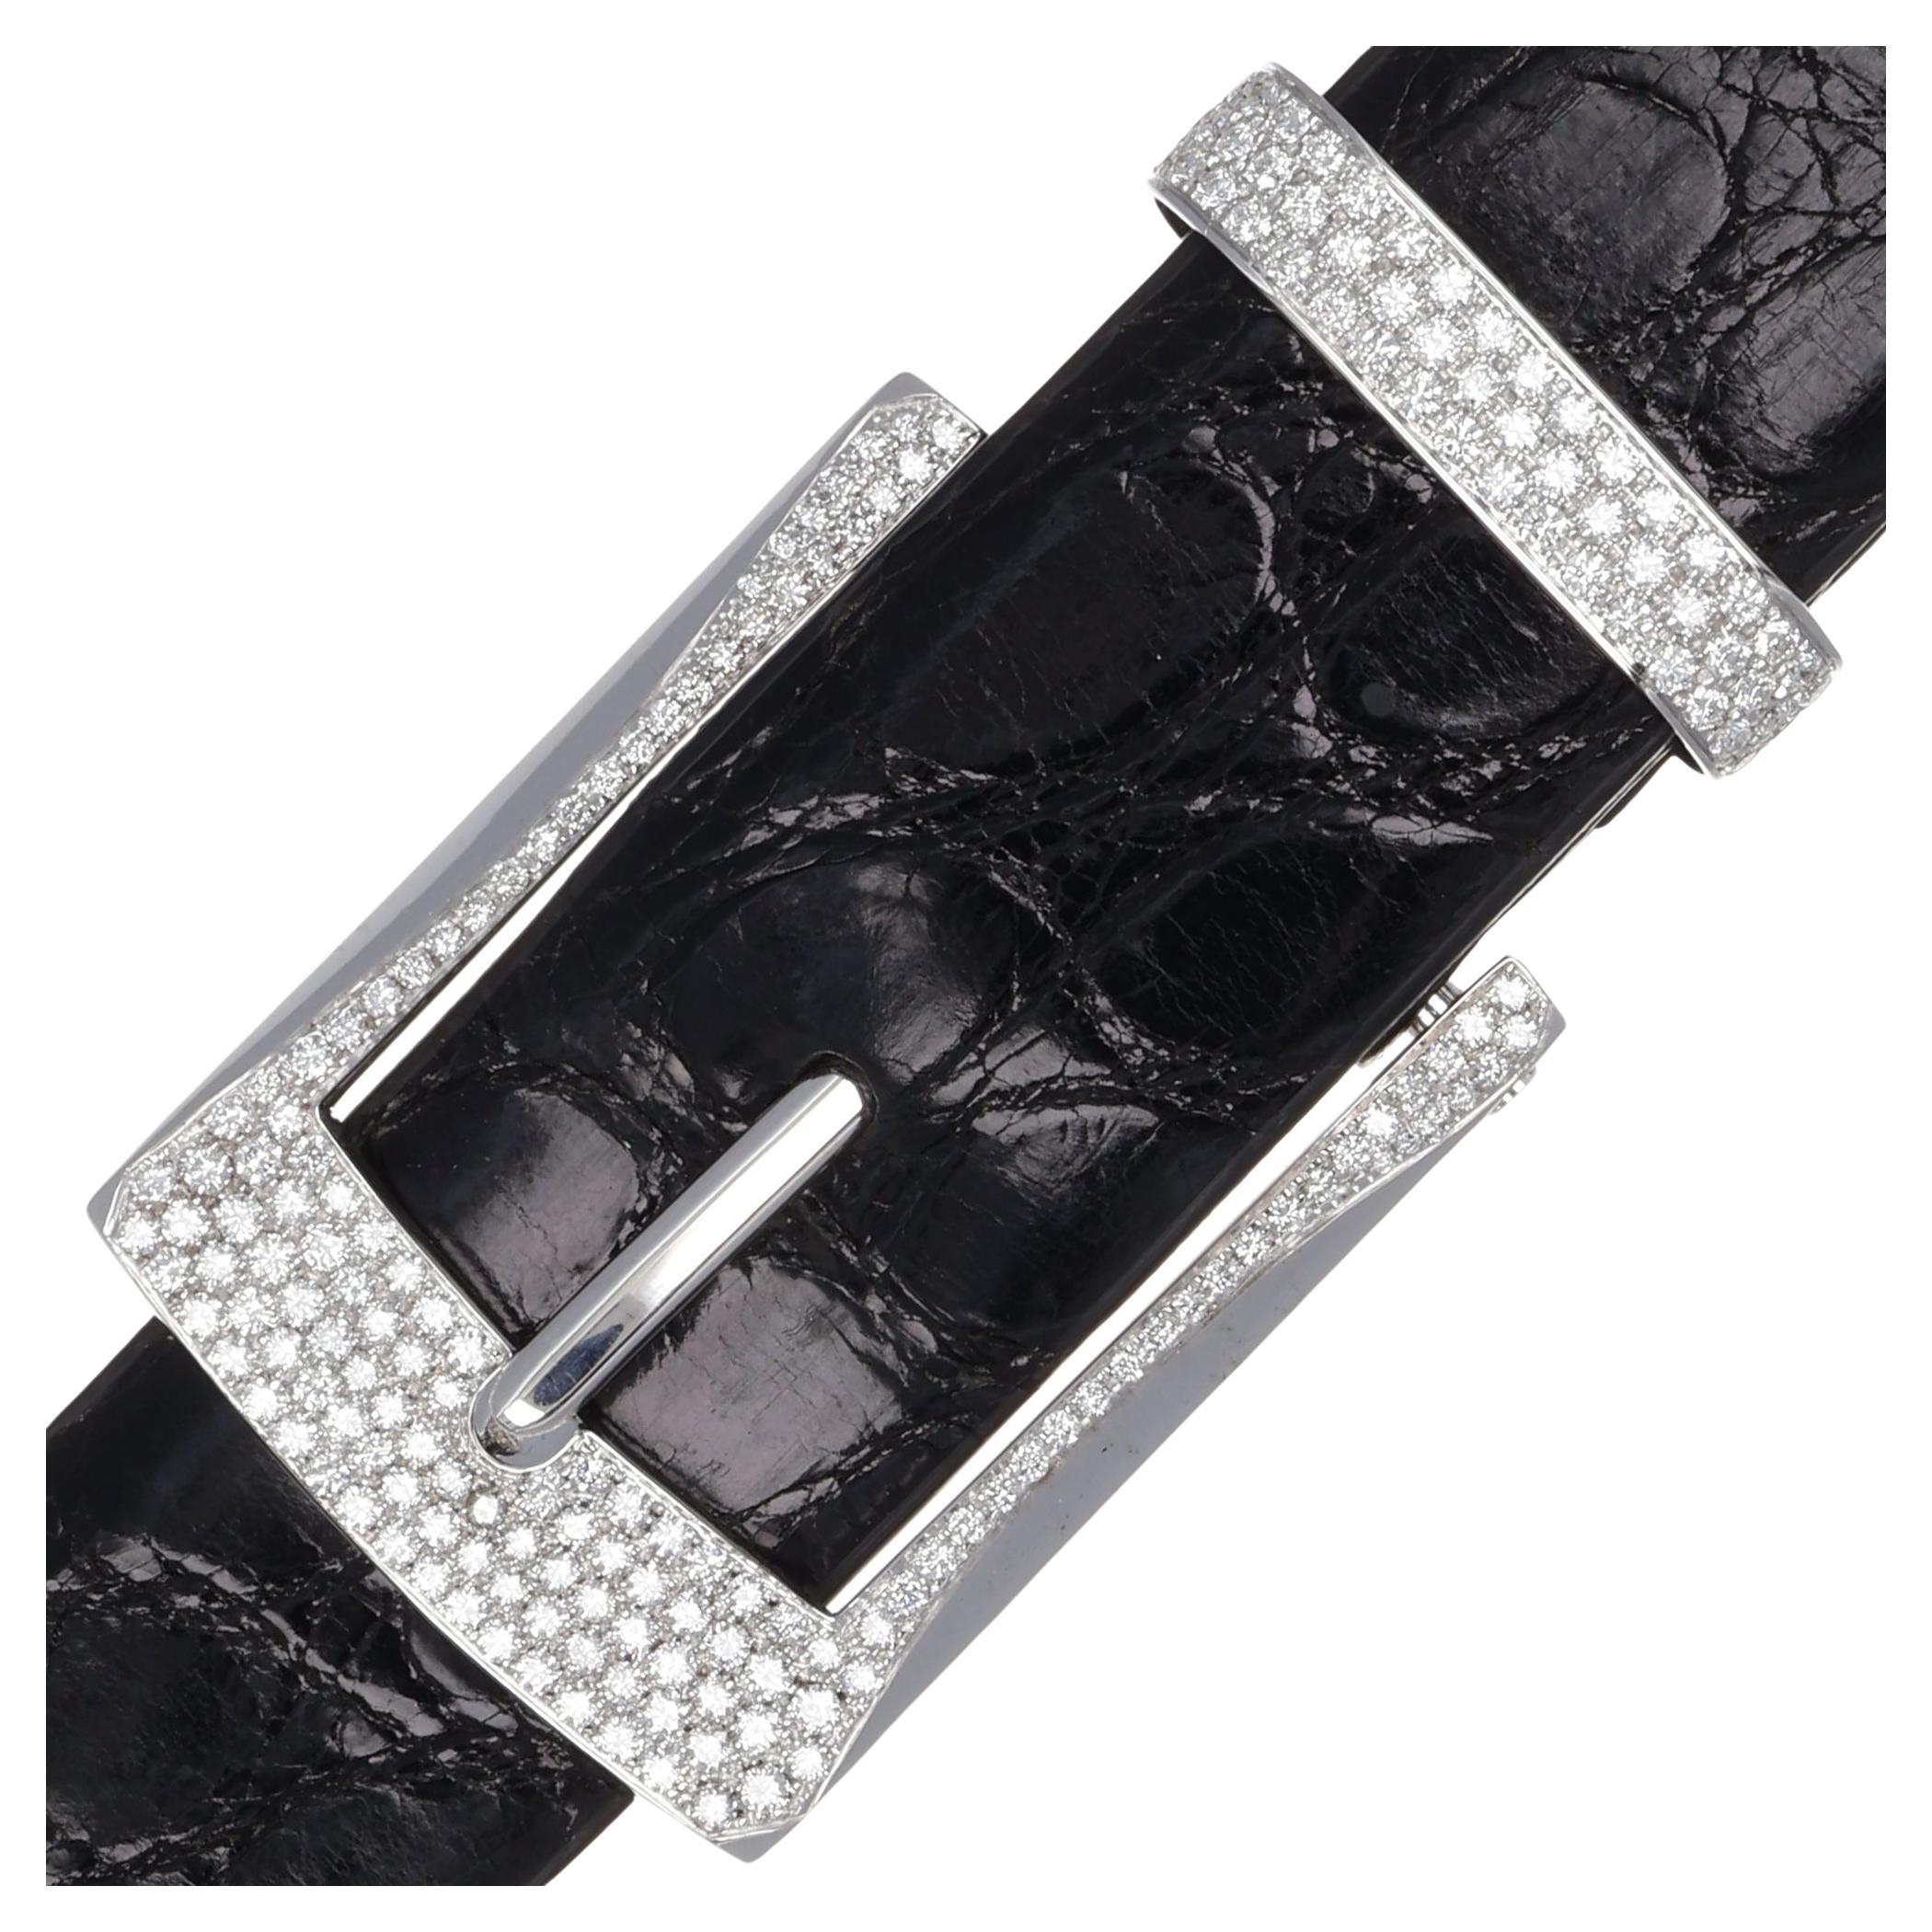 18Kt White Gold Precious Belt Buckle White Diamonds 4.88 ct Made in Italy Gift 